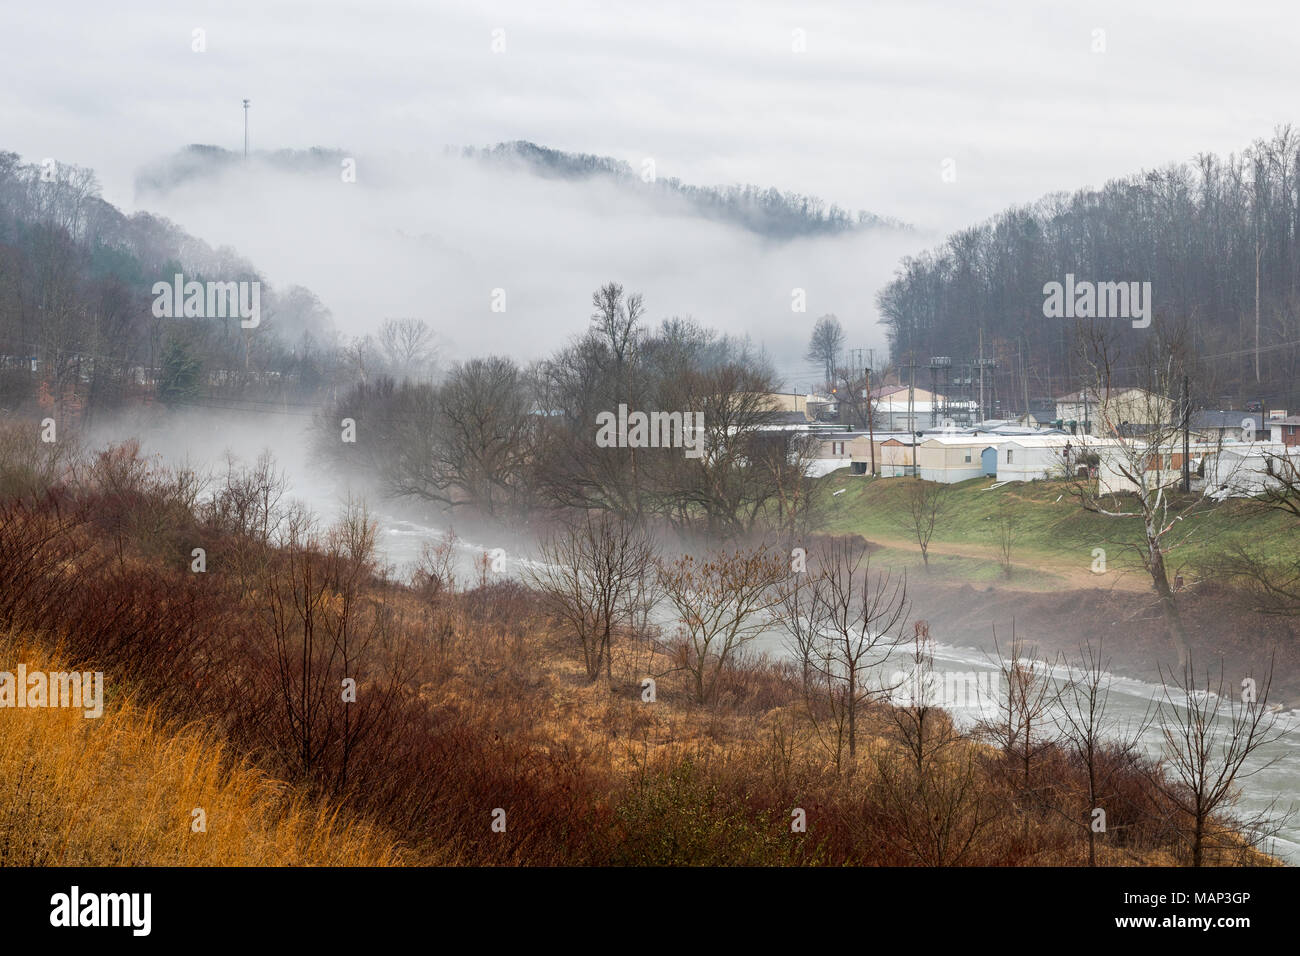 Mist rises in the background of this rural residential scene. Stock Photo